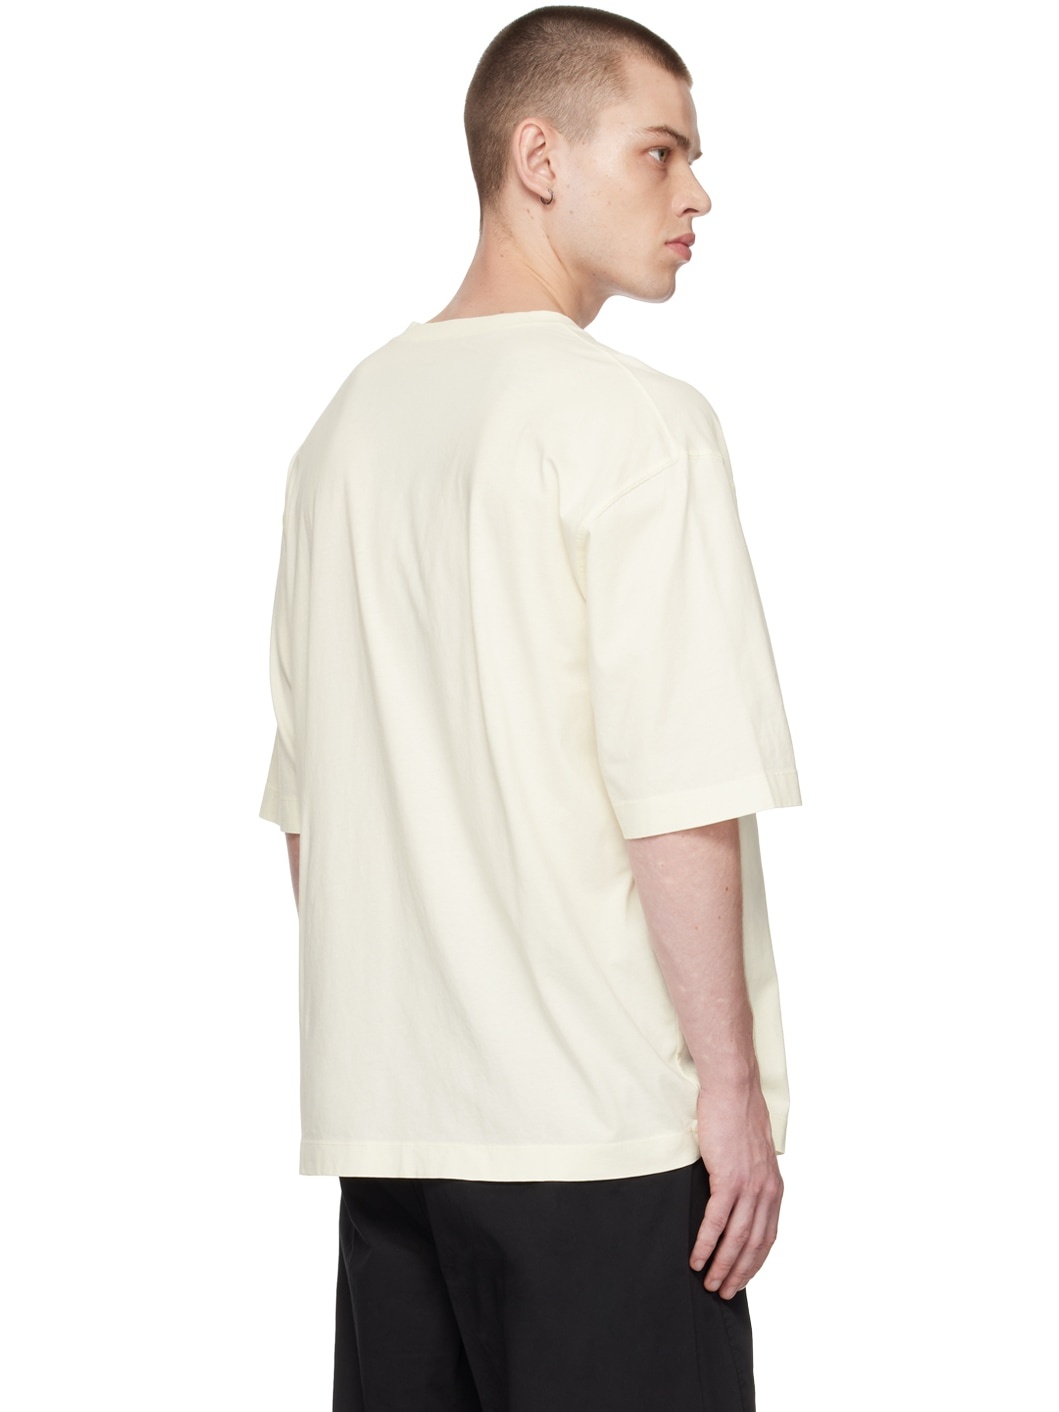 Off-White Garment-Dyed T-Shirt - 3